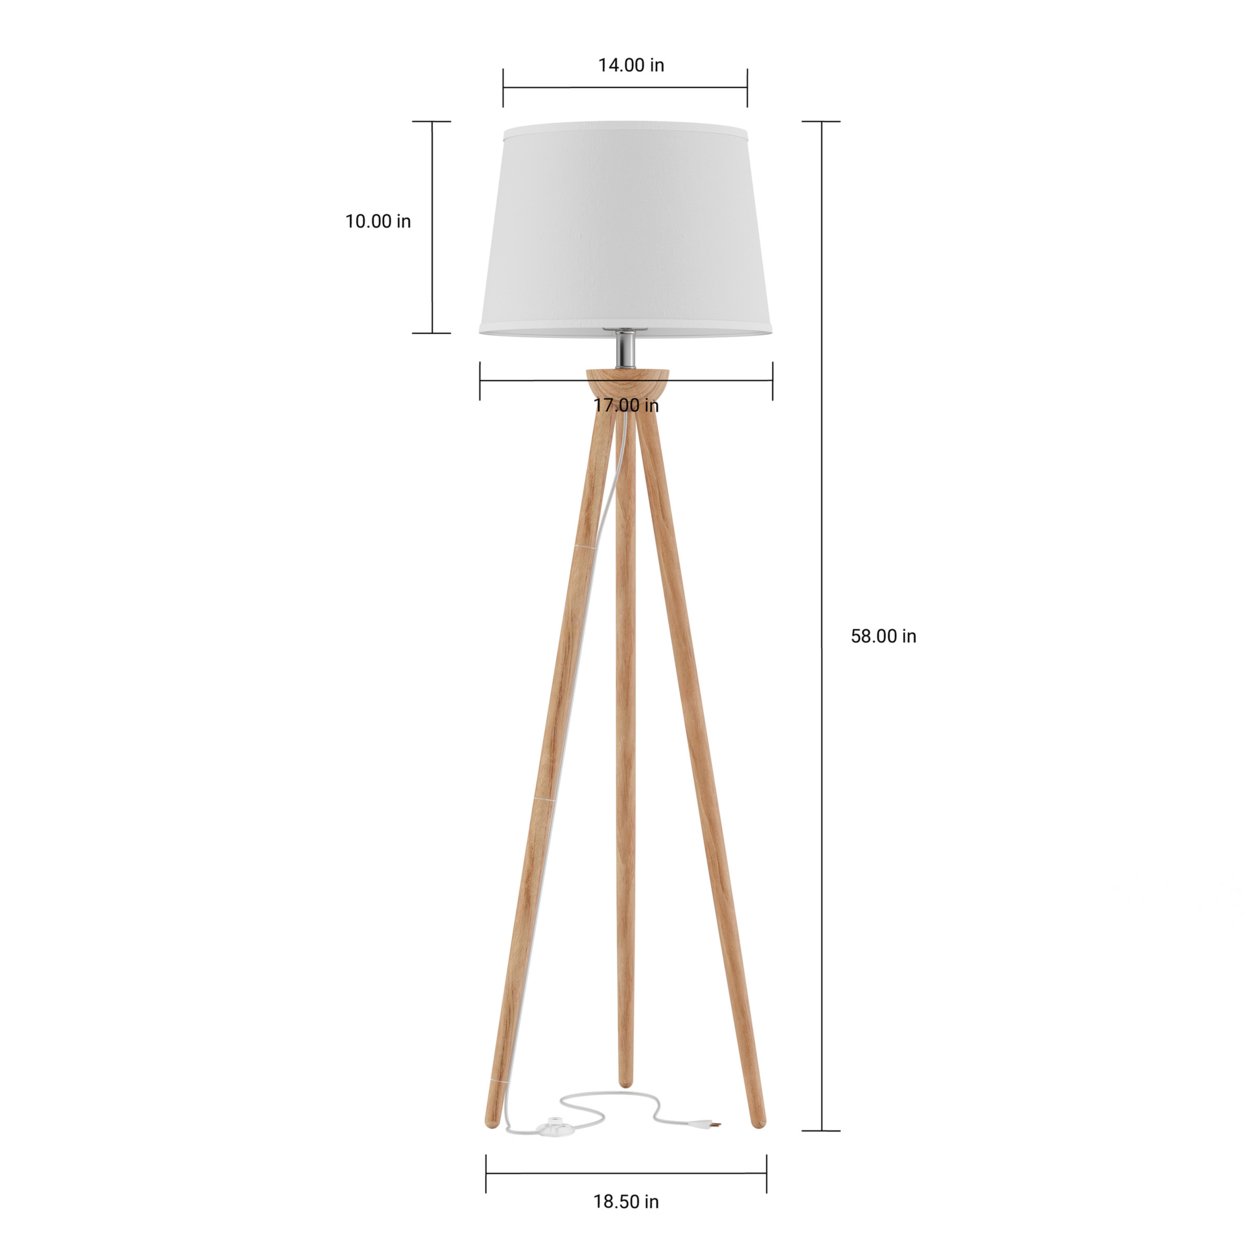 Tripod Floor Lamp-Modern Light With LED Bulb Included-Natural Oak Wood With White Shade